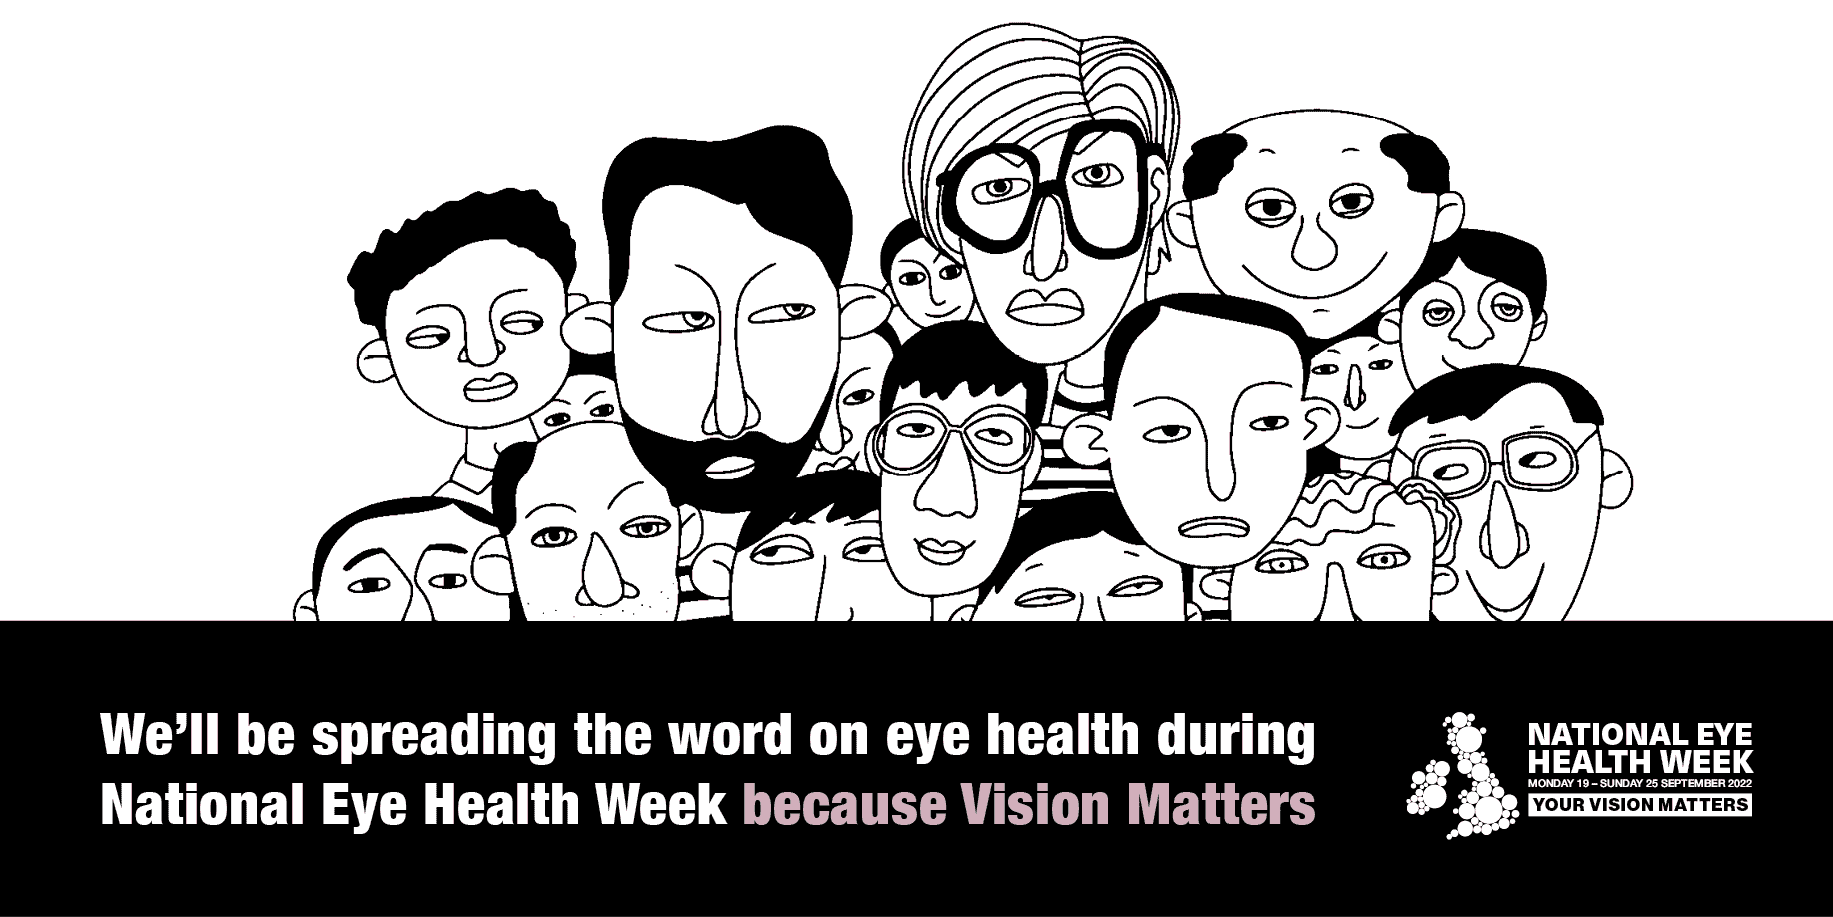 National Eye Health - We're spreading the word!